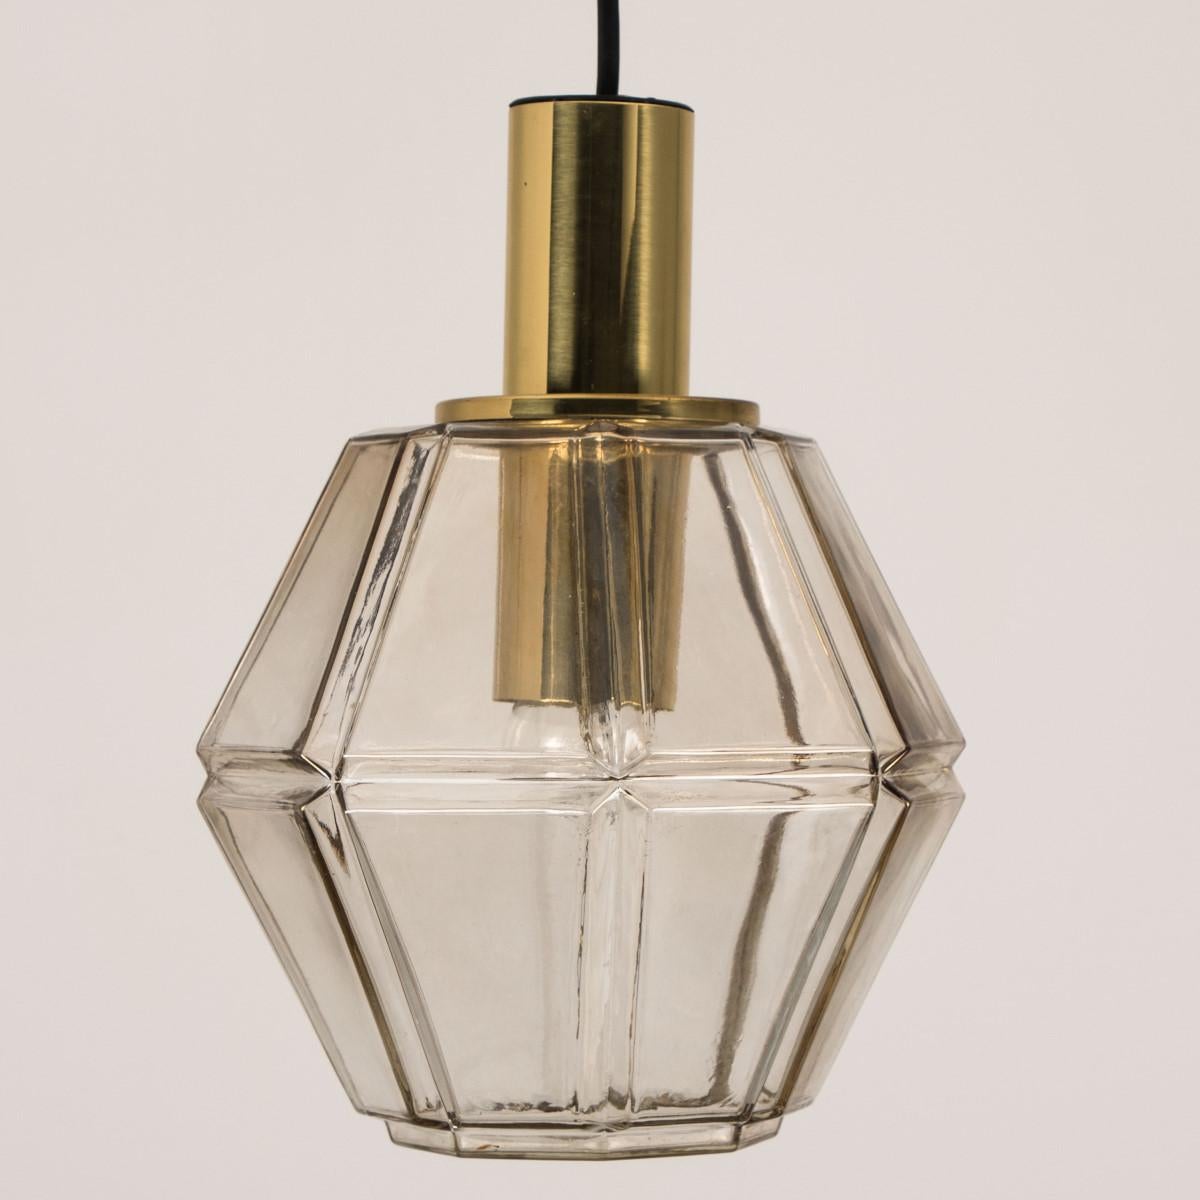 1 of the 3 Geometric Brass and Clear Glass Pendant Lights by Limburg, 1960 For Sale 3